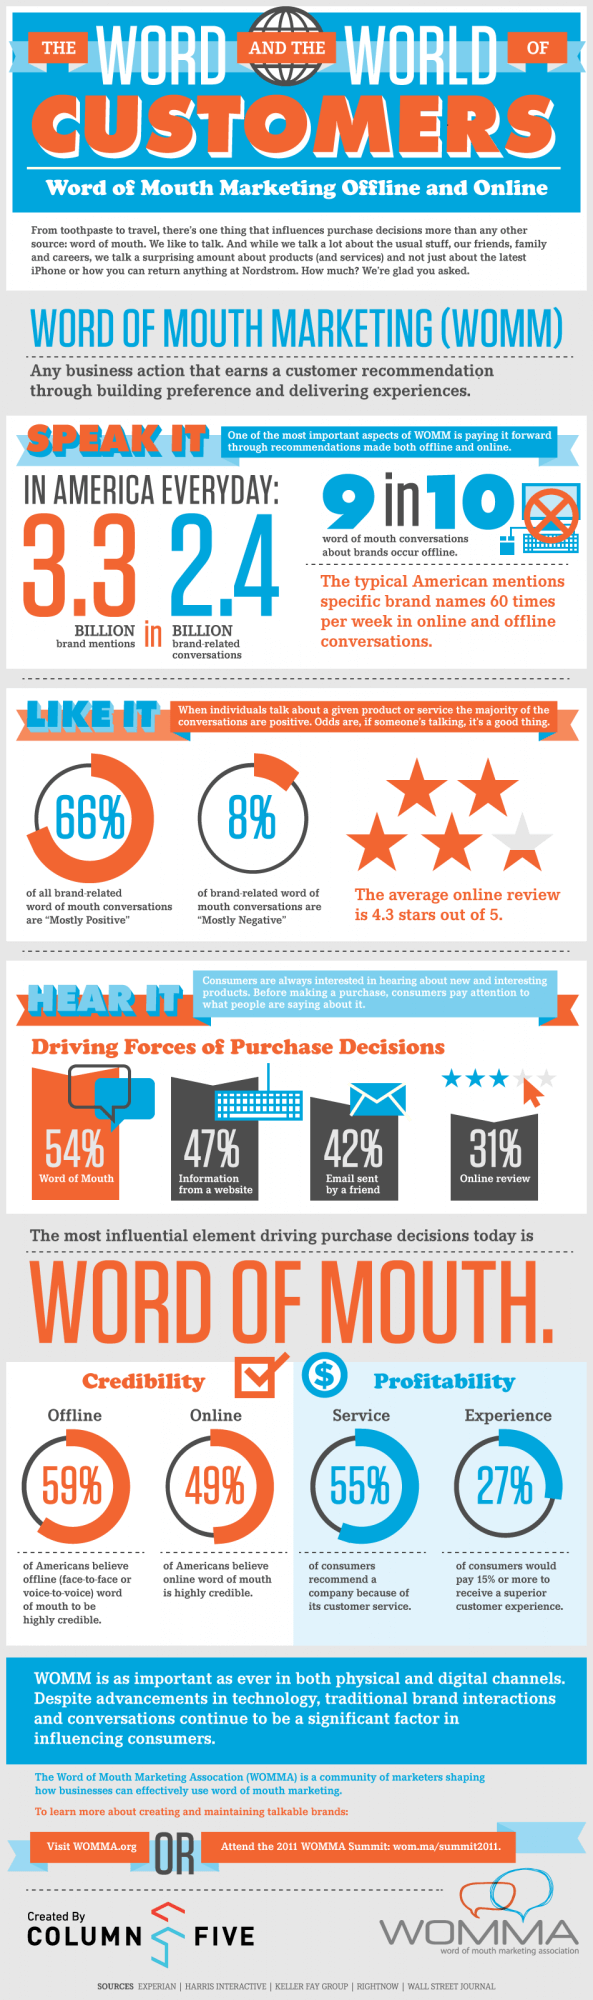 word of mouth marketing